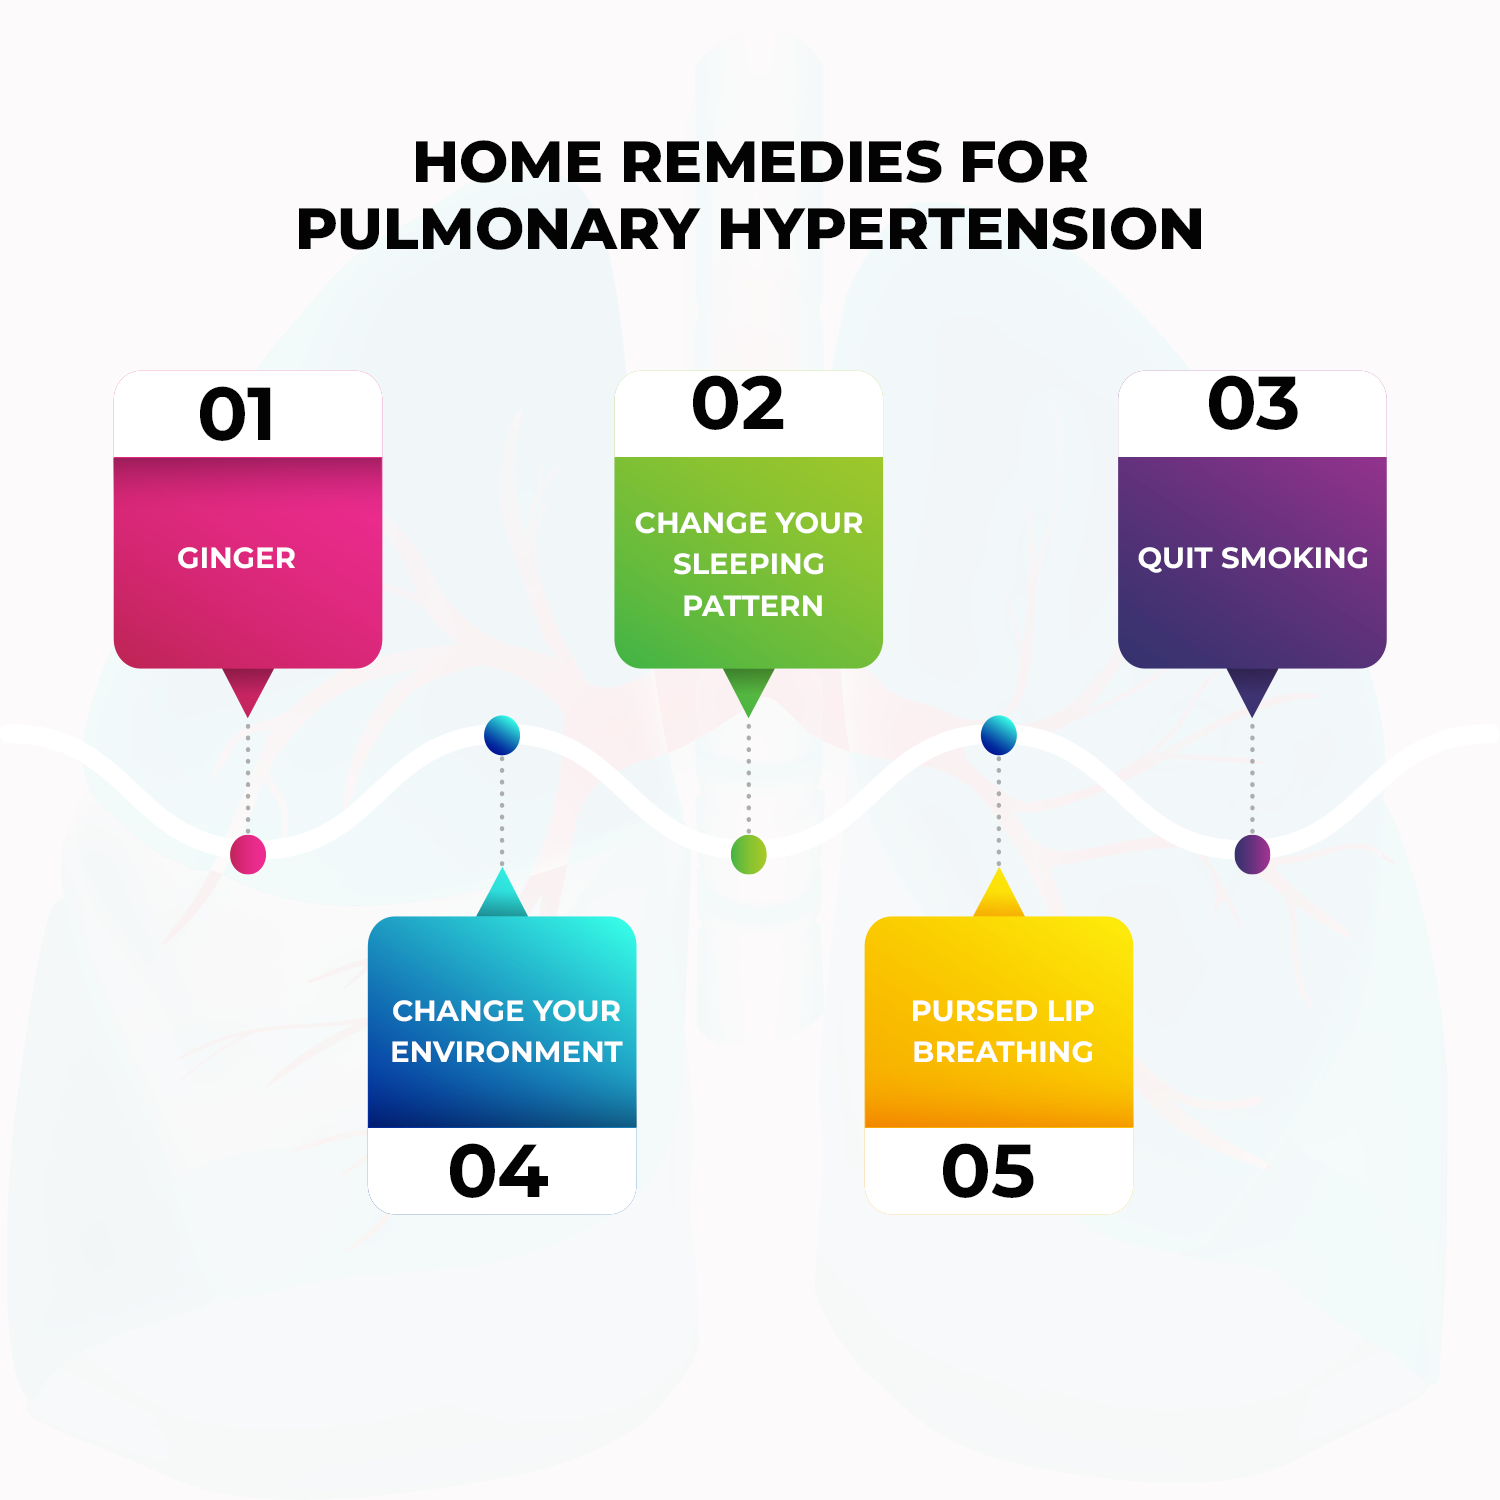 Home Remedies For Pulmonary Hypertension